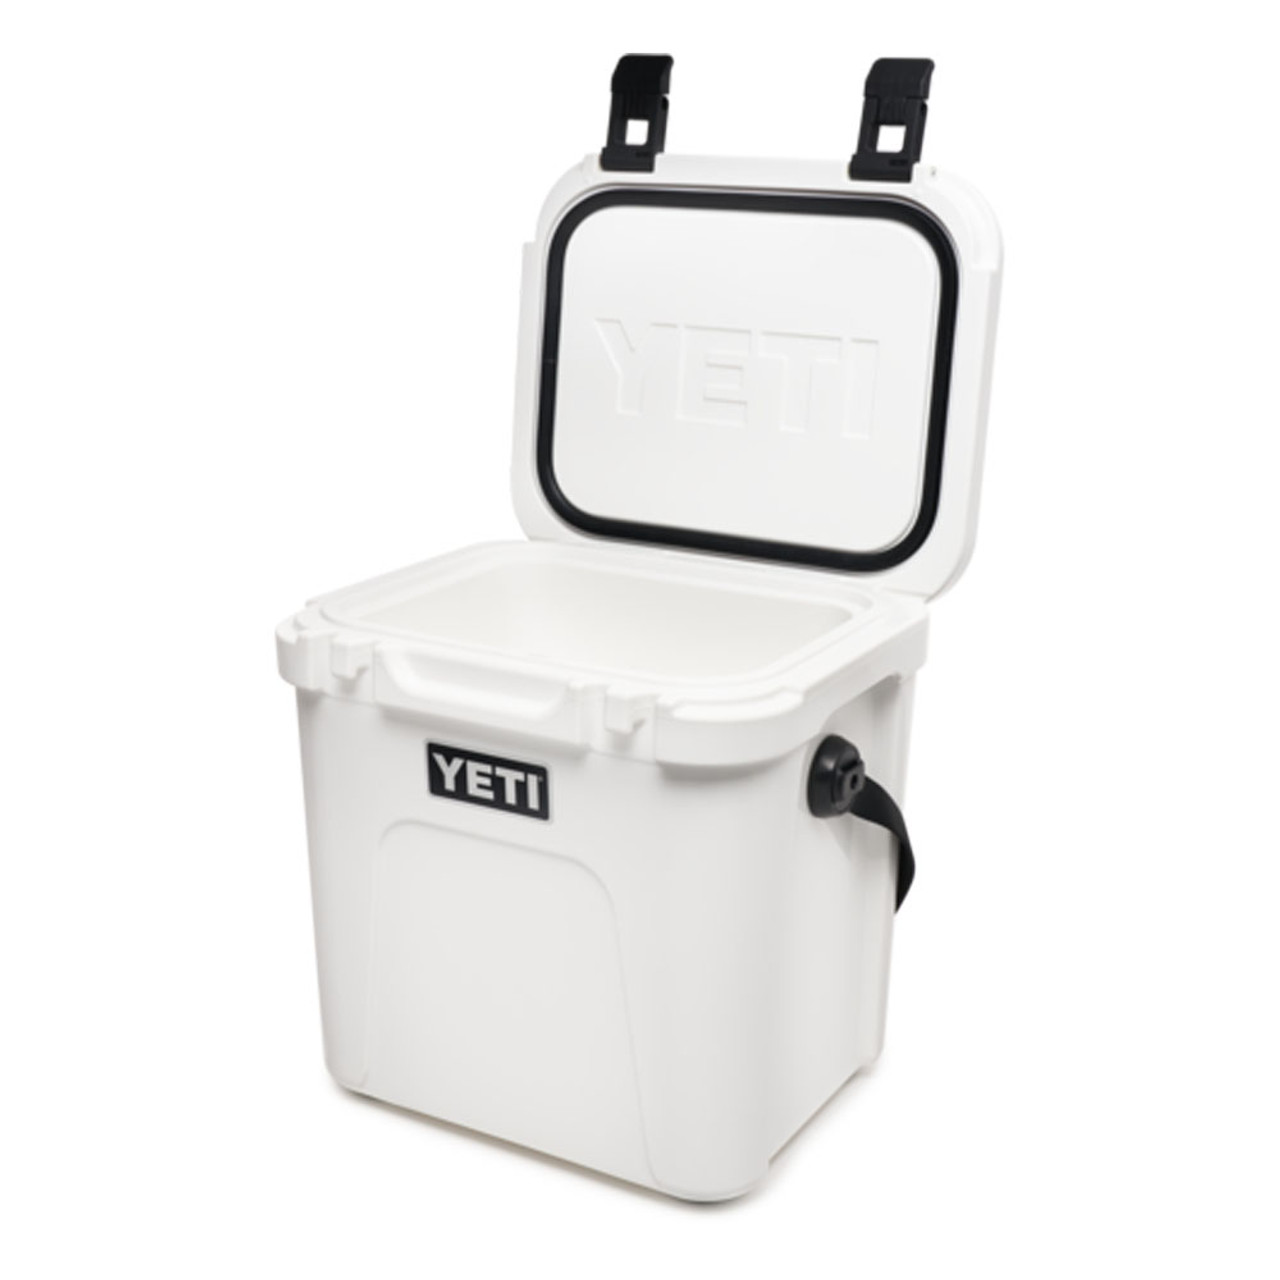 https://cdn11.bigcommerce.com/s-zut1msomd6/images/stencil/1280x1280/products/40493/242182/yeti-roadie-24-hard-cooler-10022020000-white-open__77346.1698441671.jpg?c=1